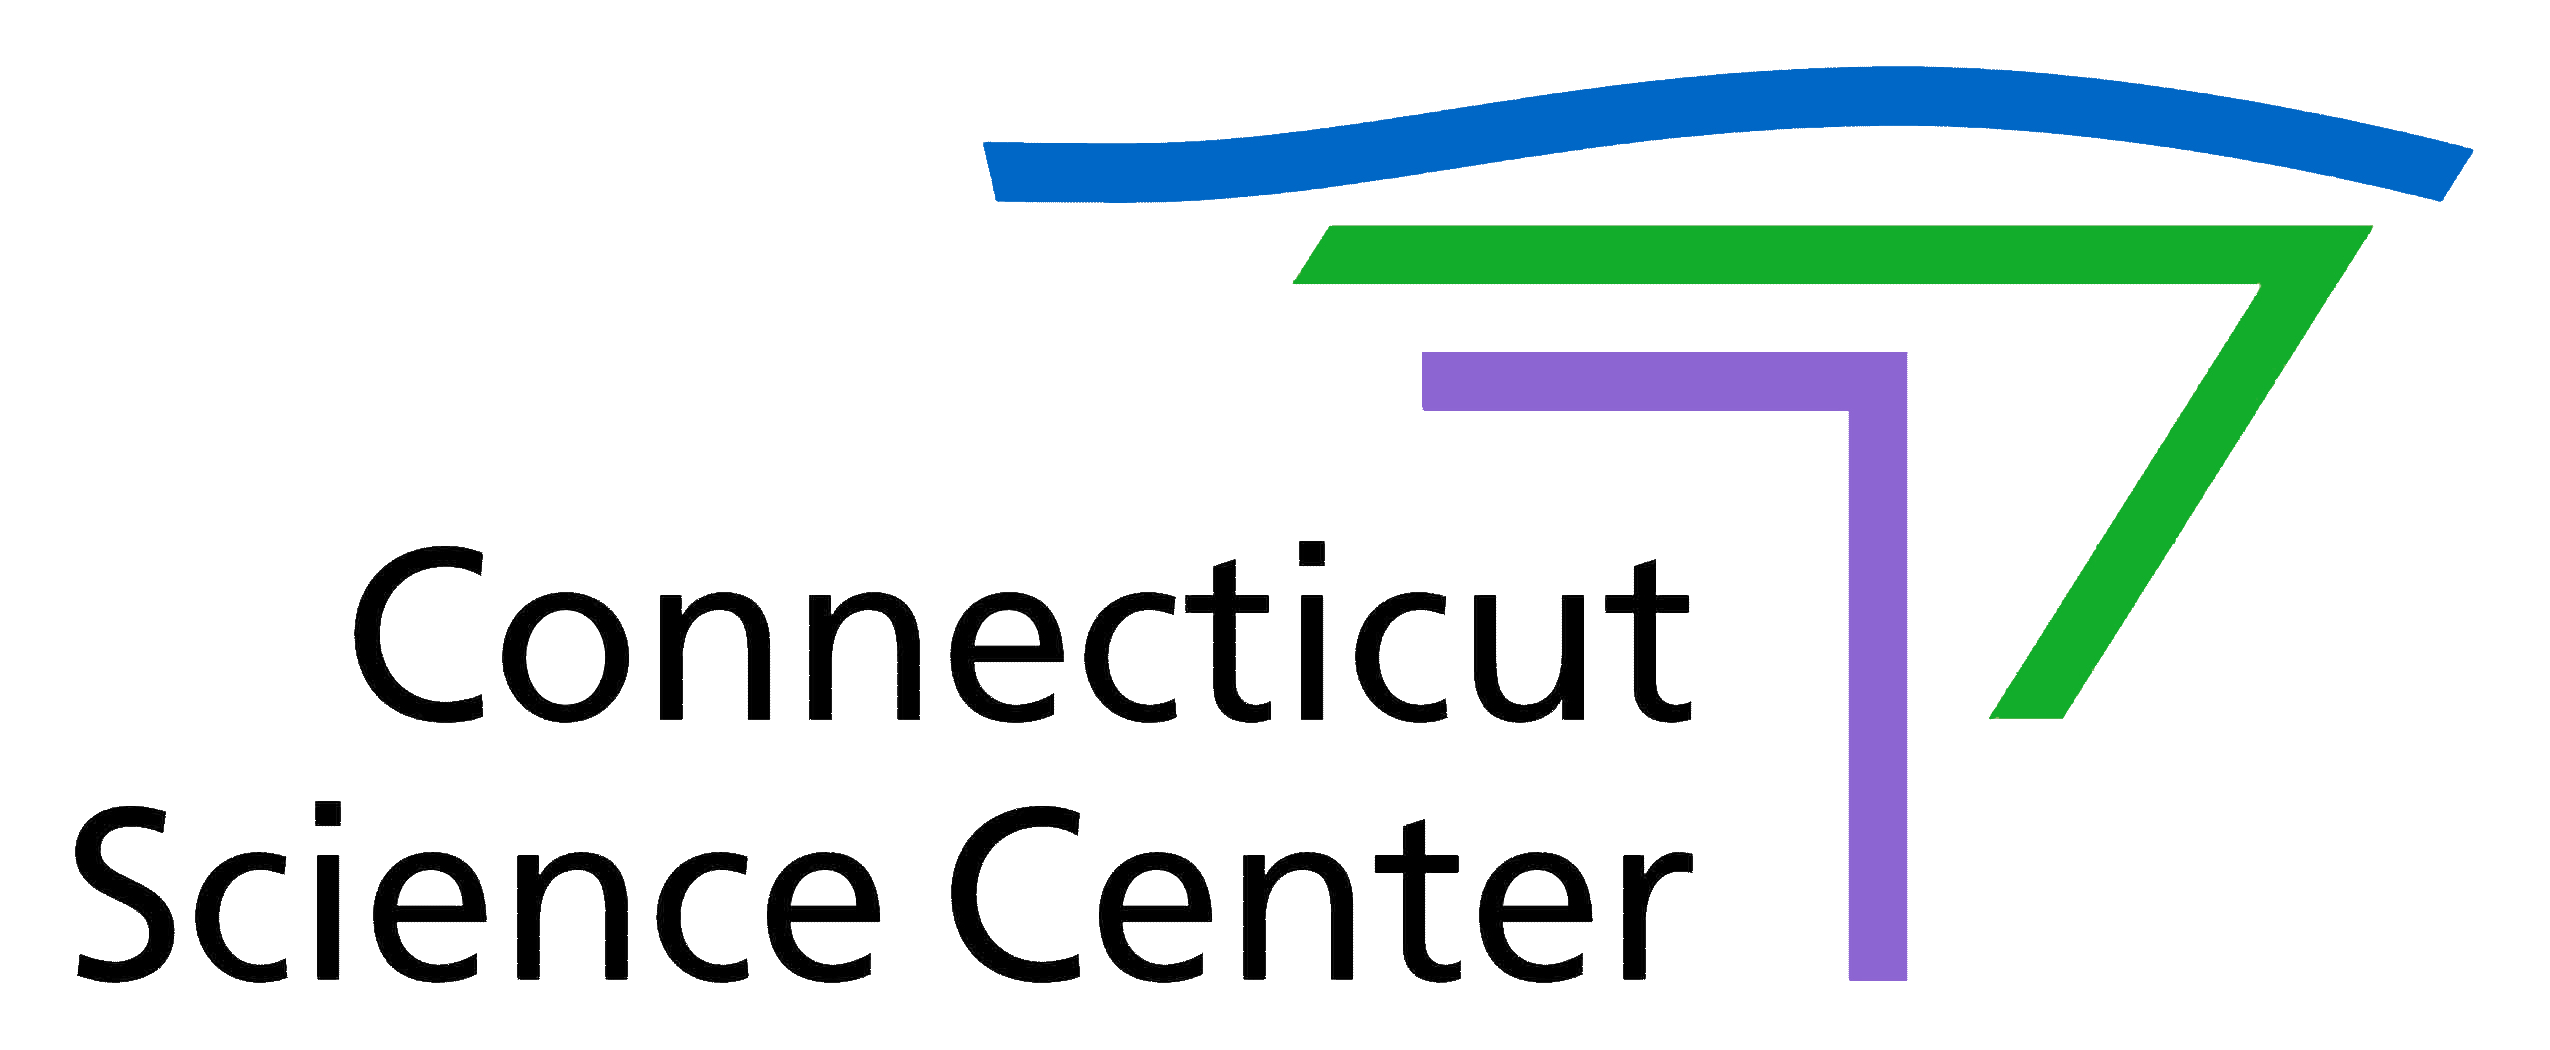 The logo of the Connecticut Science Center (their name in sans serif black type with a swoopy, abstract representation of their building in green, purple, and blue)